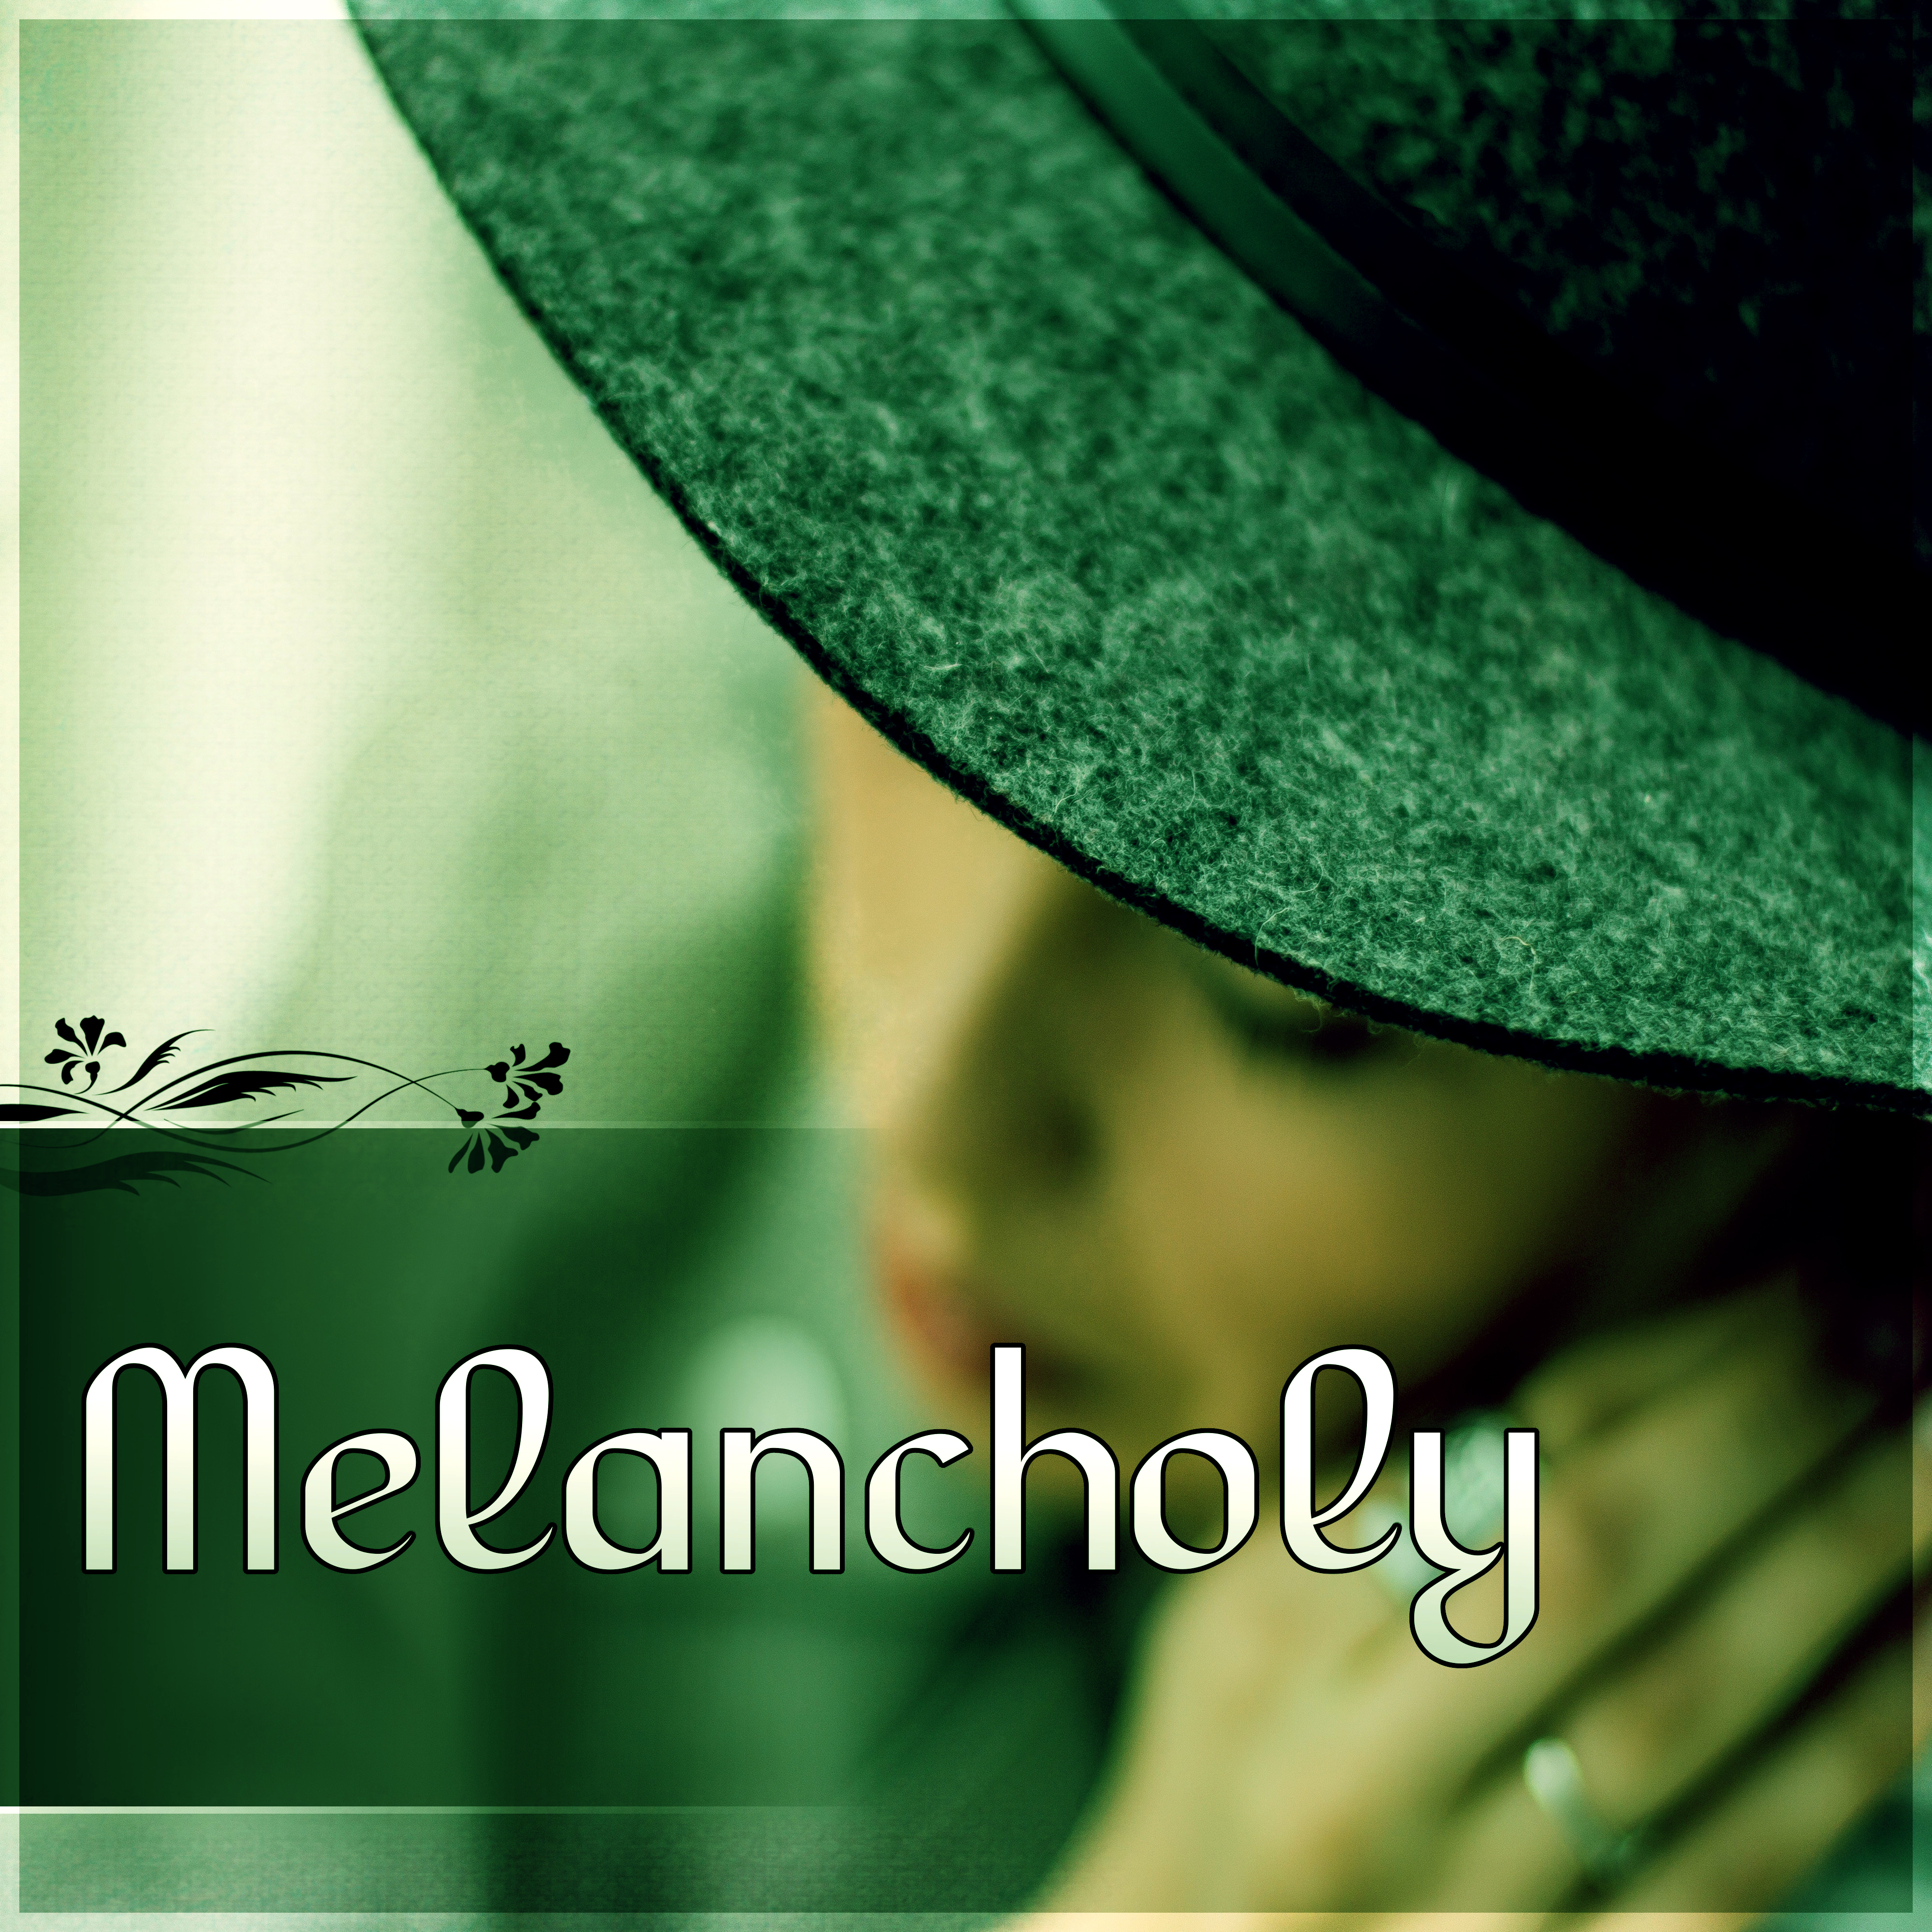 Melancholy – Romantic Piano, Sentimental Music, Sad Instrumental, Piano Songs, Background Music to Cry, Sad Music for Sad Moments